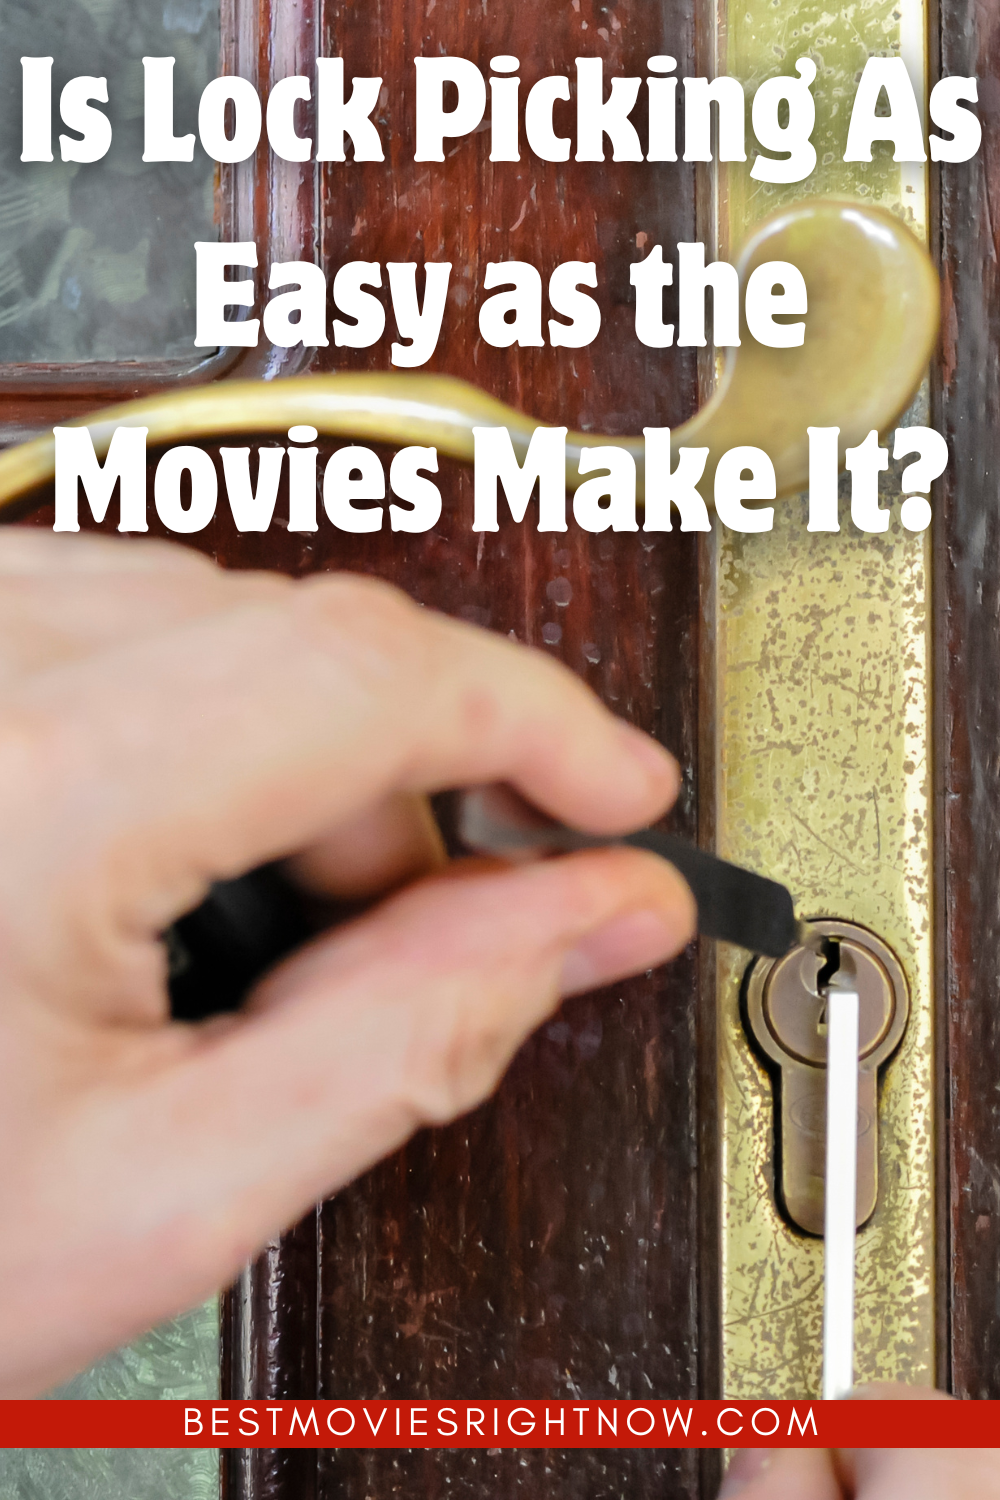 A man uses lock picking tools to pick the lock of a house. with text "Is Lock Picking As Easy as the Movies Make It?"